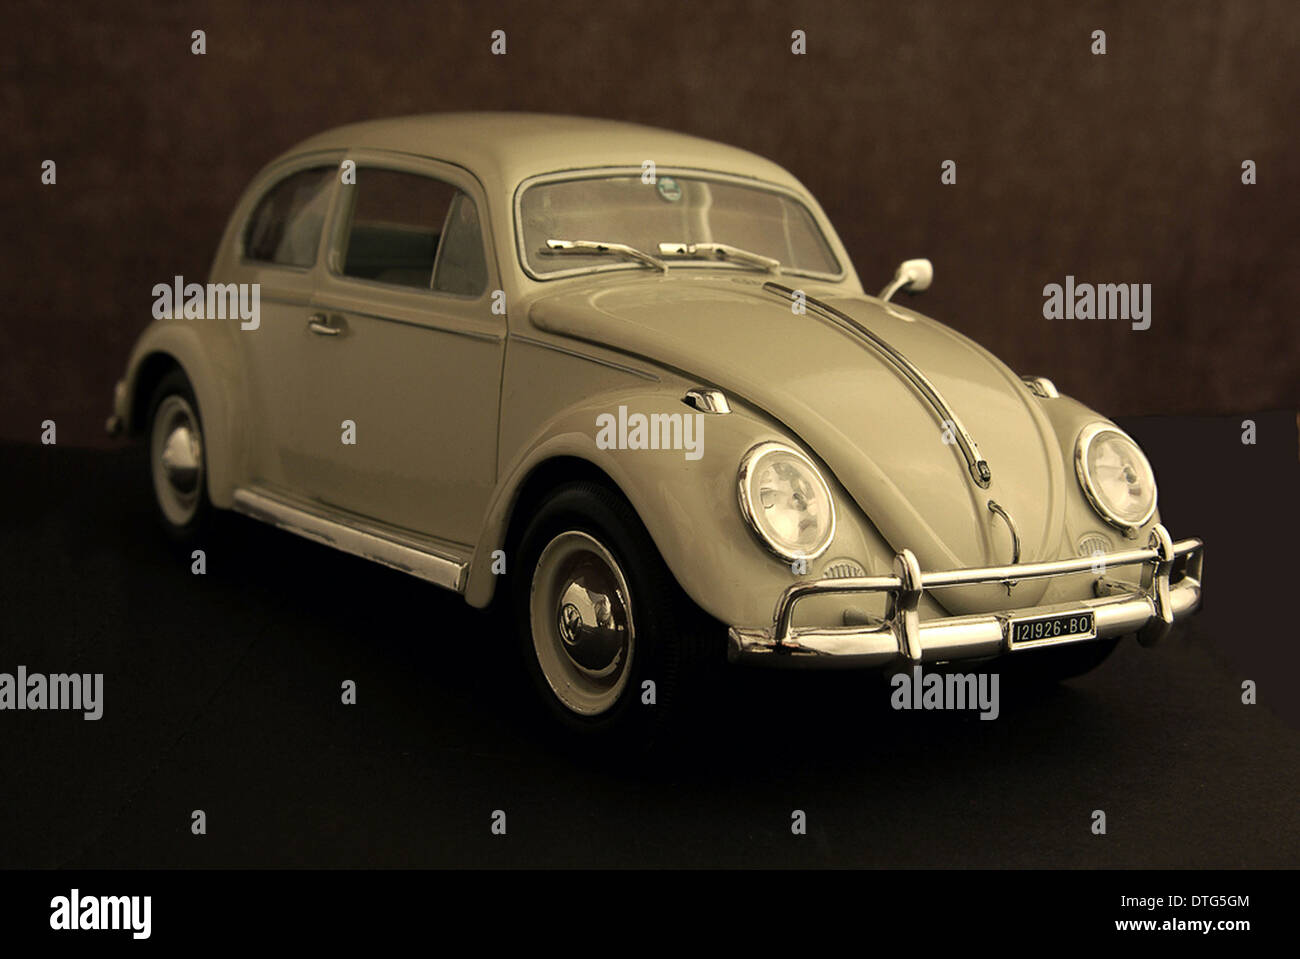 Sepia toned image of a Volkswagen Beetle Stock Photo